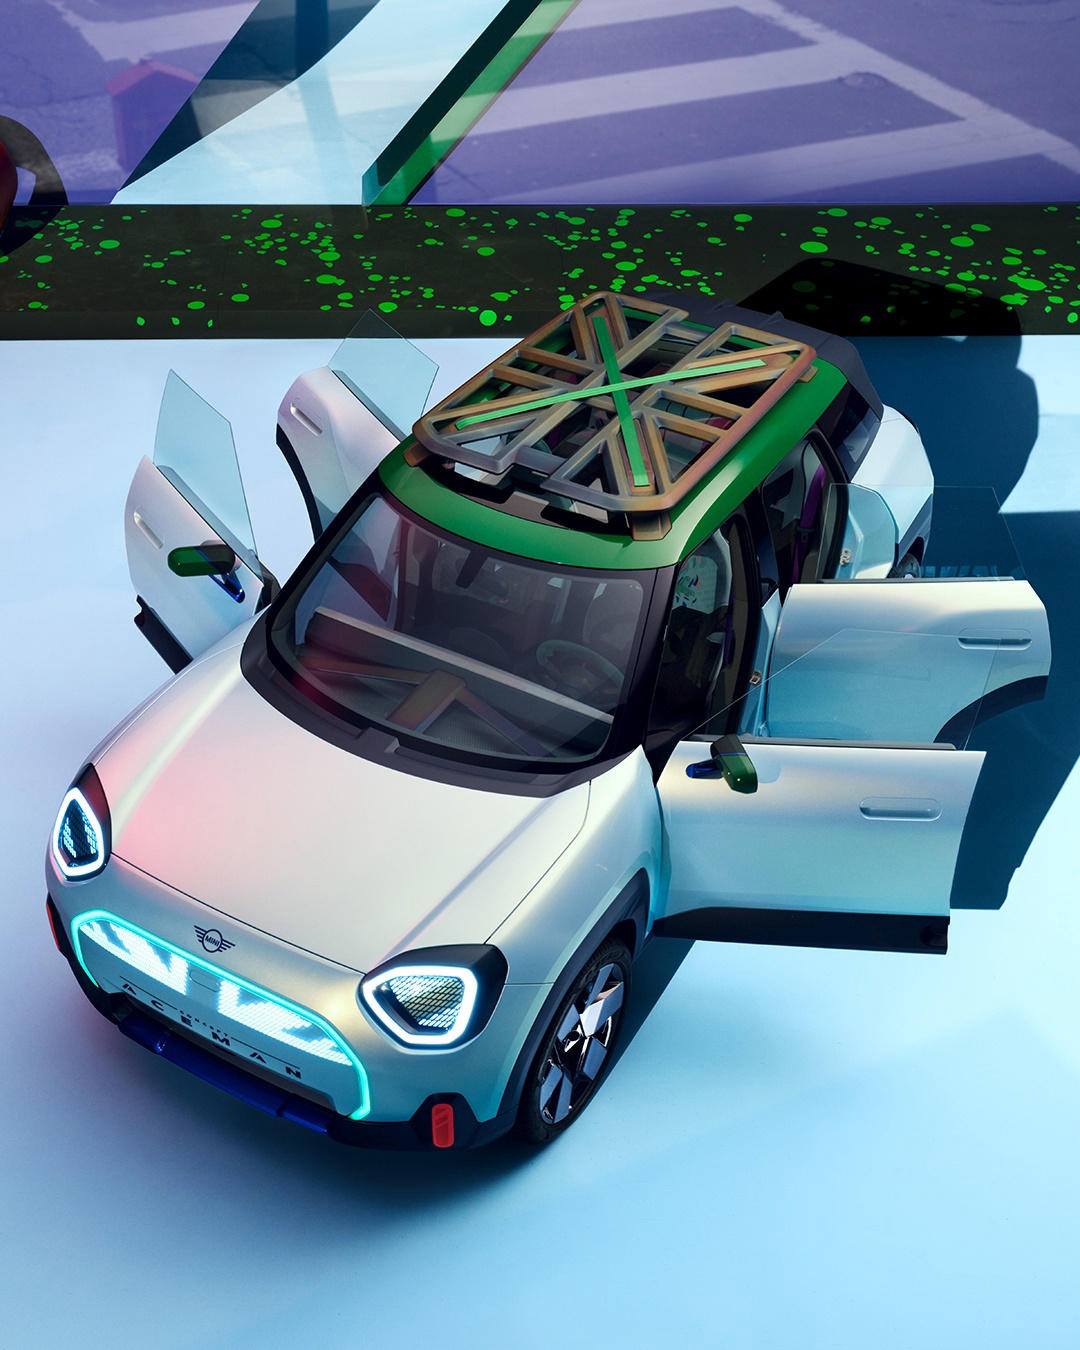 image  1 MINI - From its Icy Sunglow Green exterior to its MINI-malistic interior, swipe to explore the iconi